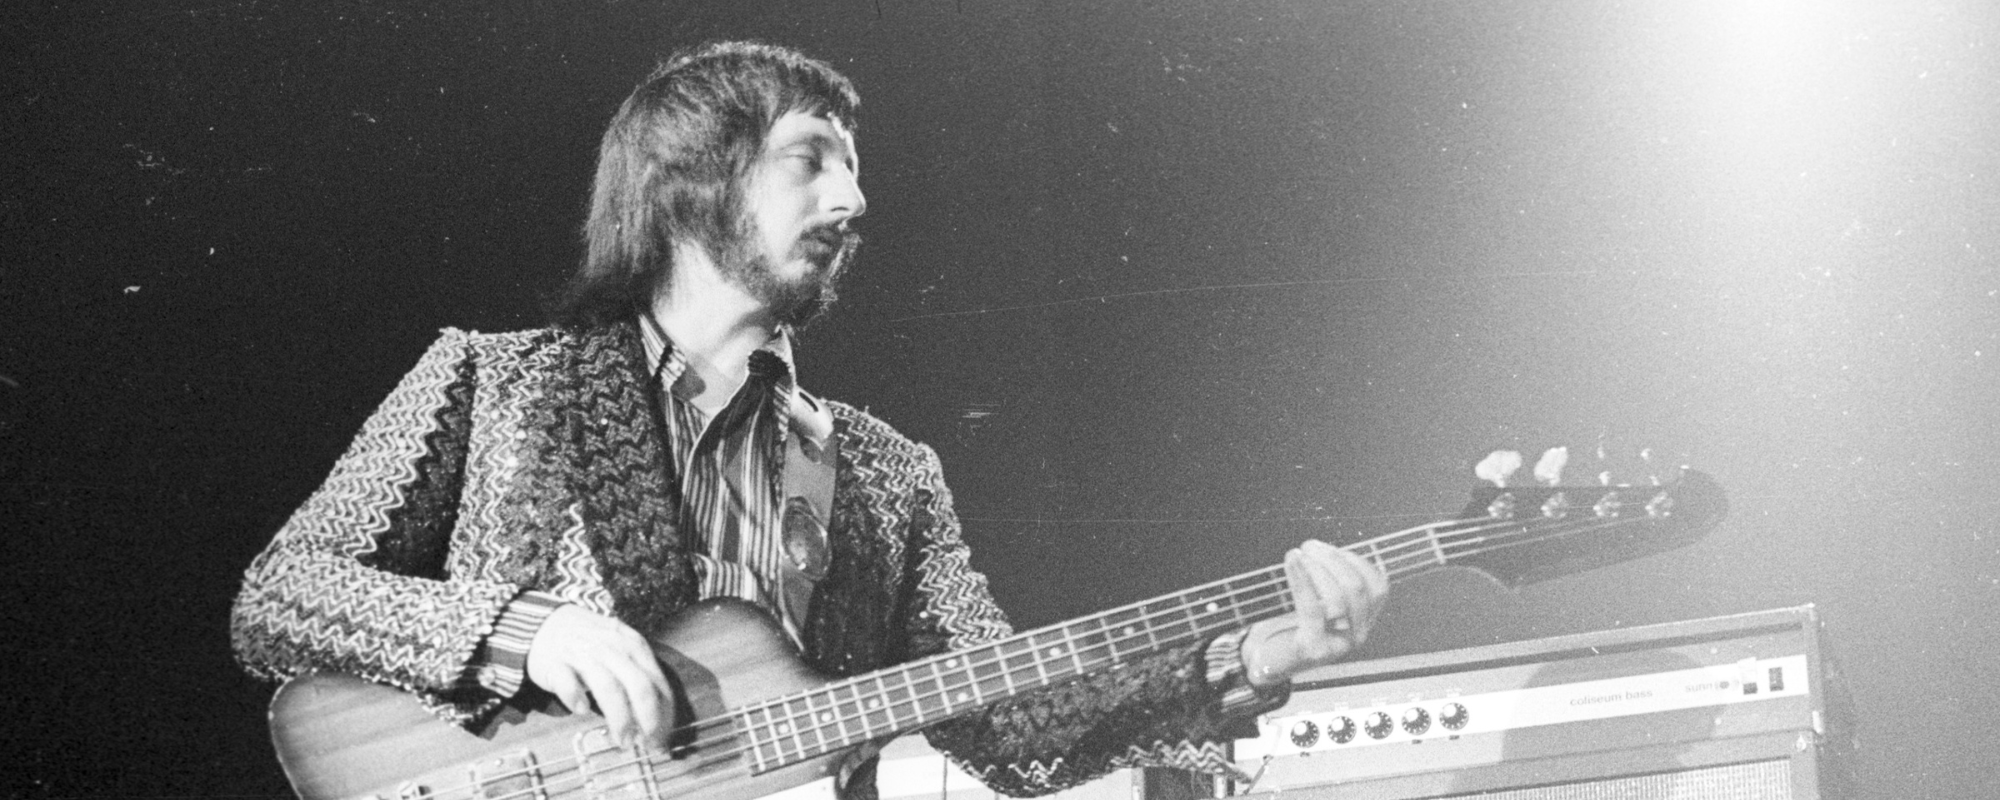 How Many of These 6 Best Classic Rock Bassists Would It Take to Change a Light Bulb?